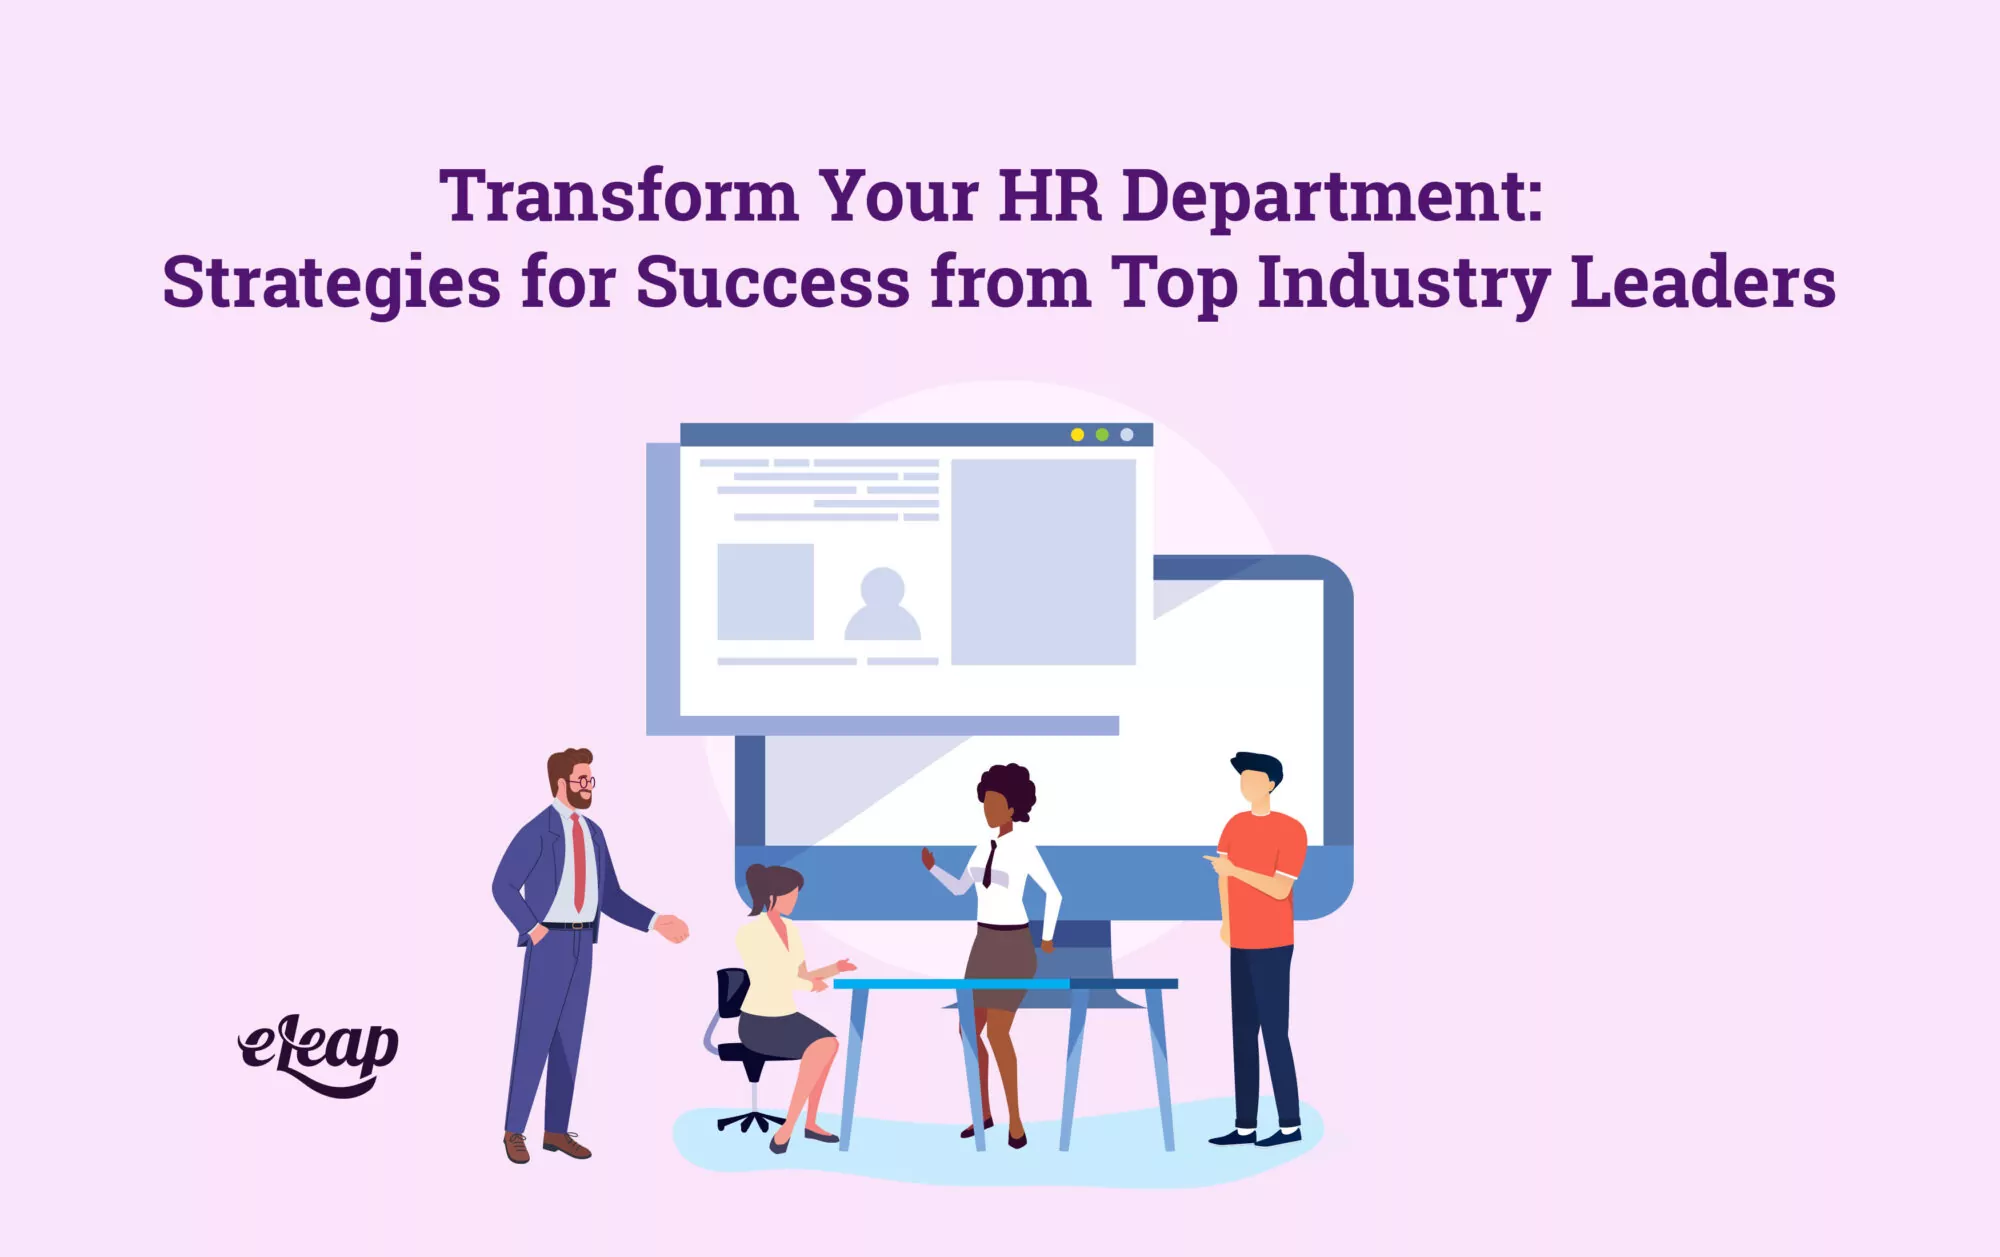 Transform Your HR Department: Strategies for Success from Top Industry Leaders